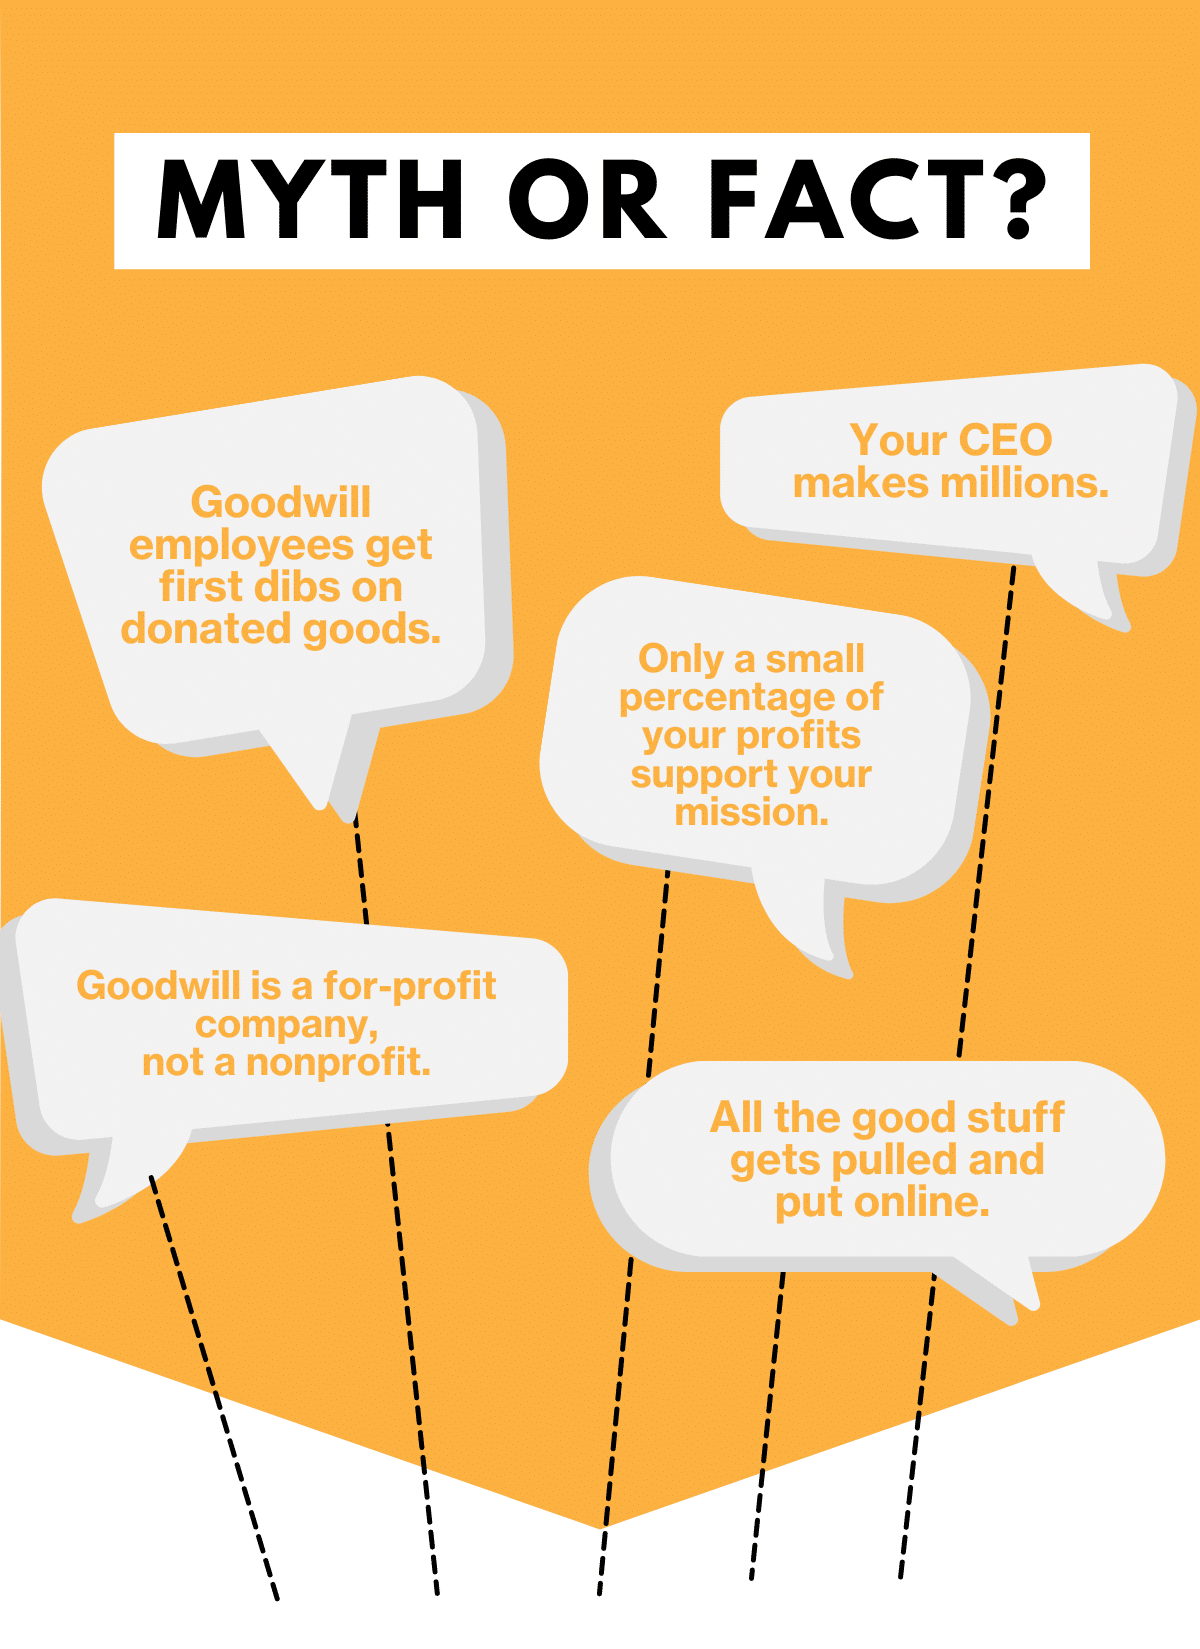 Myth buster poster about Goodwill